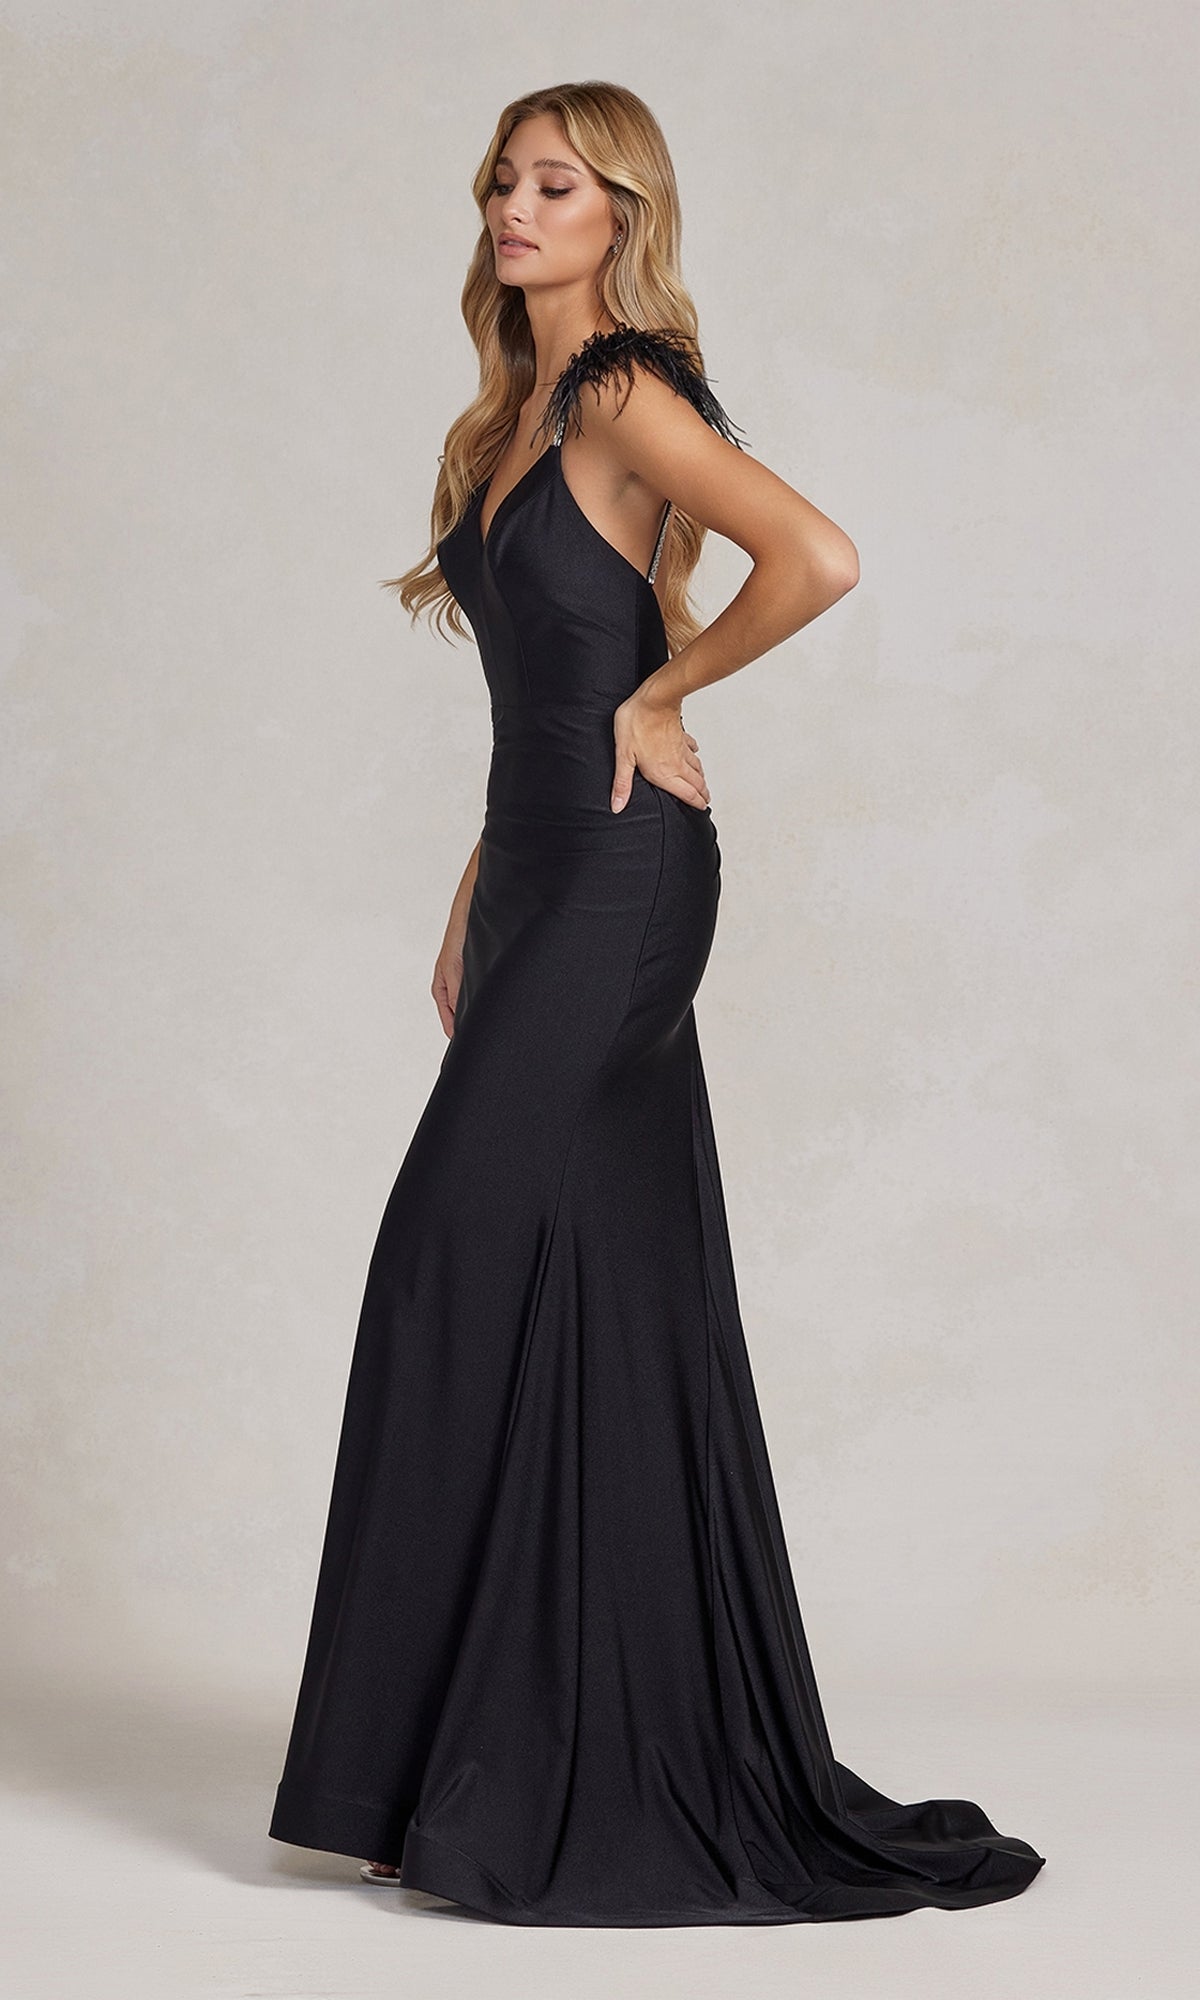 Backless Long Prom Dress with Feathers - PromGirl